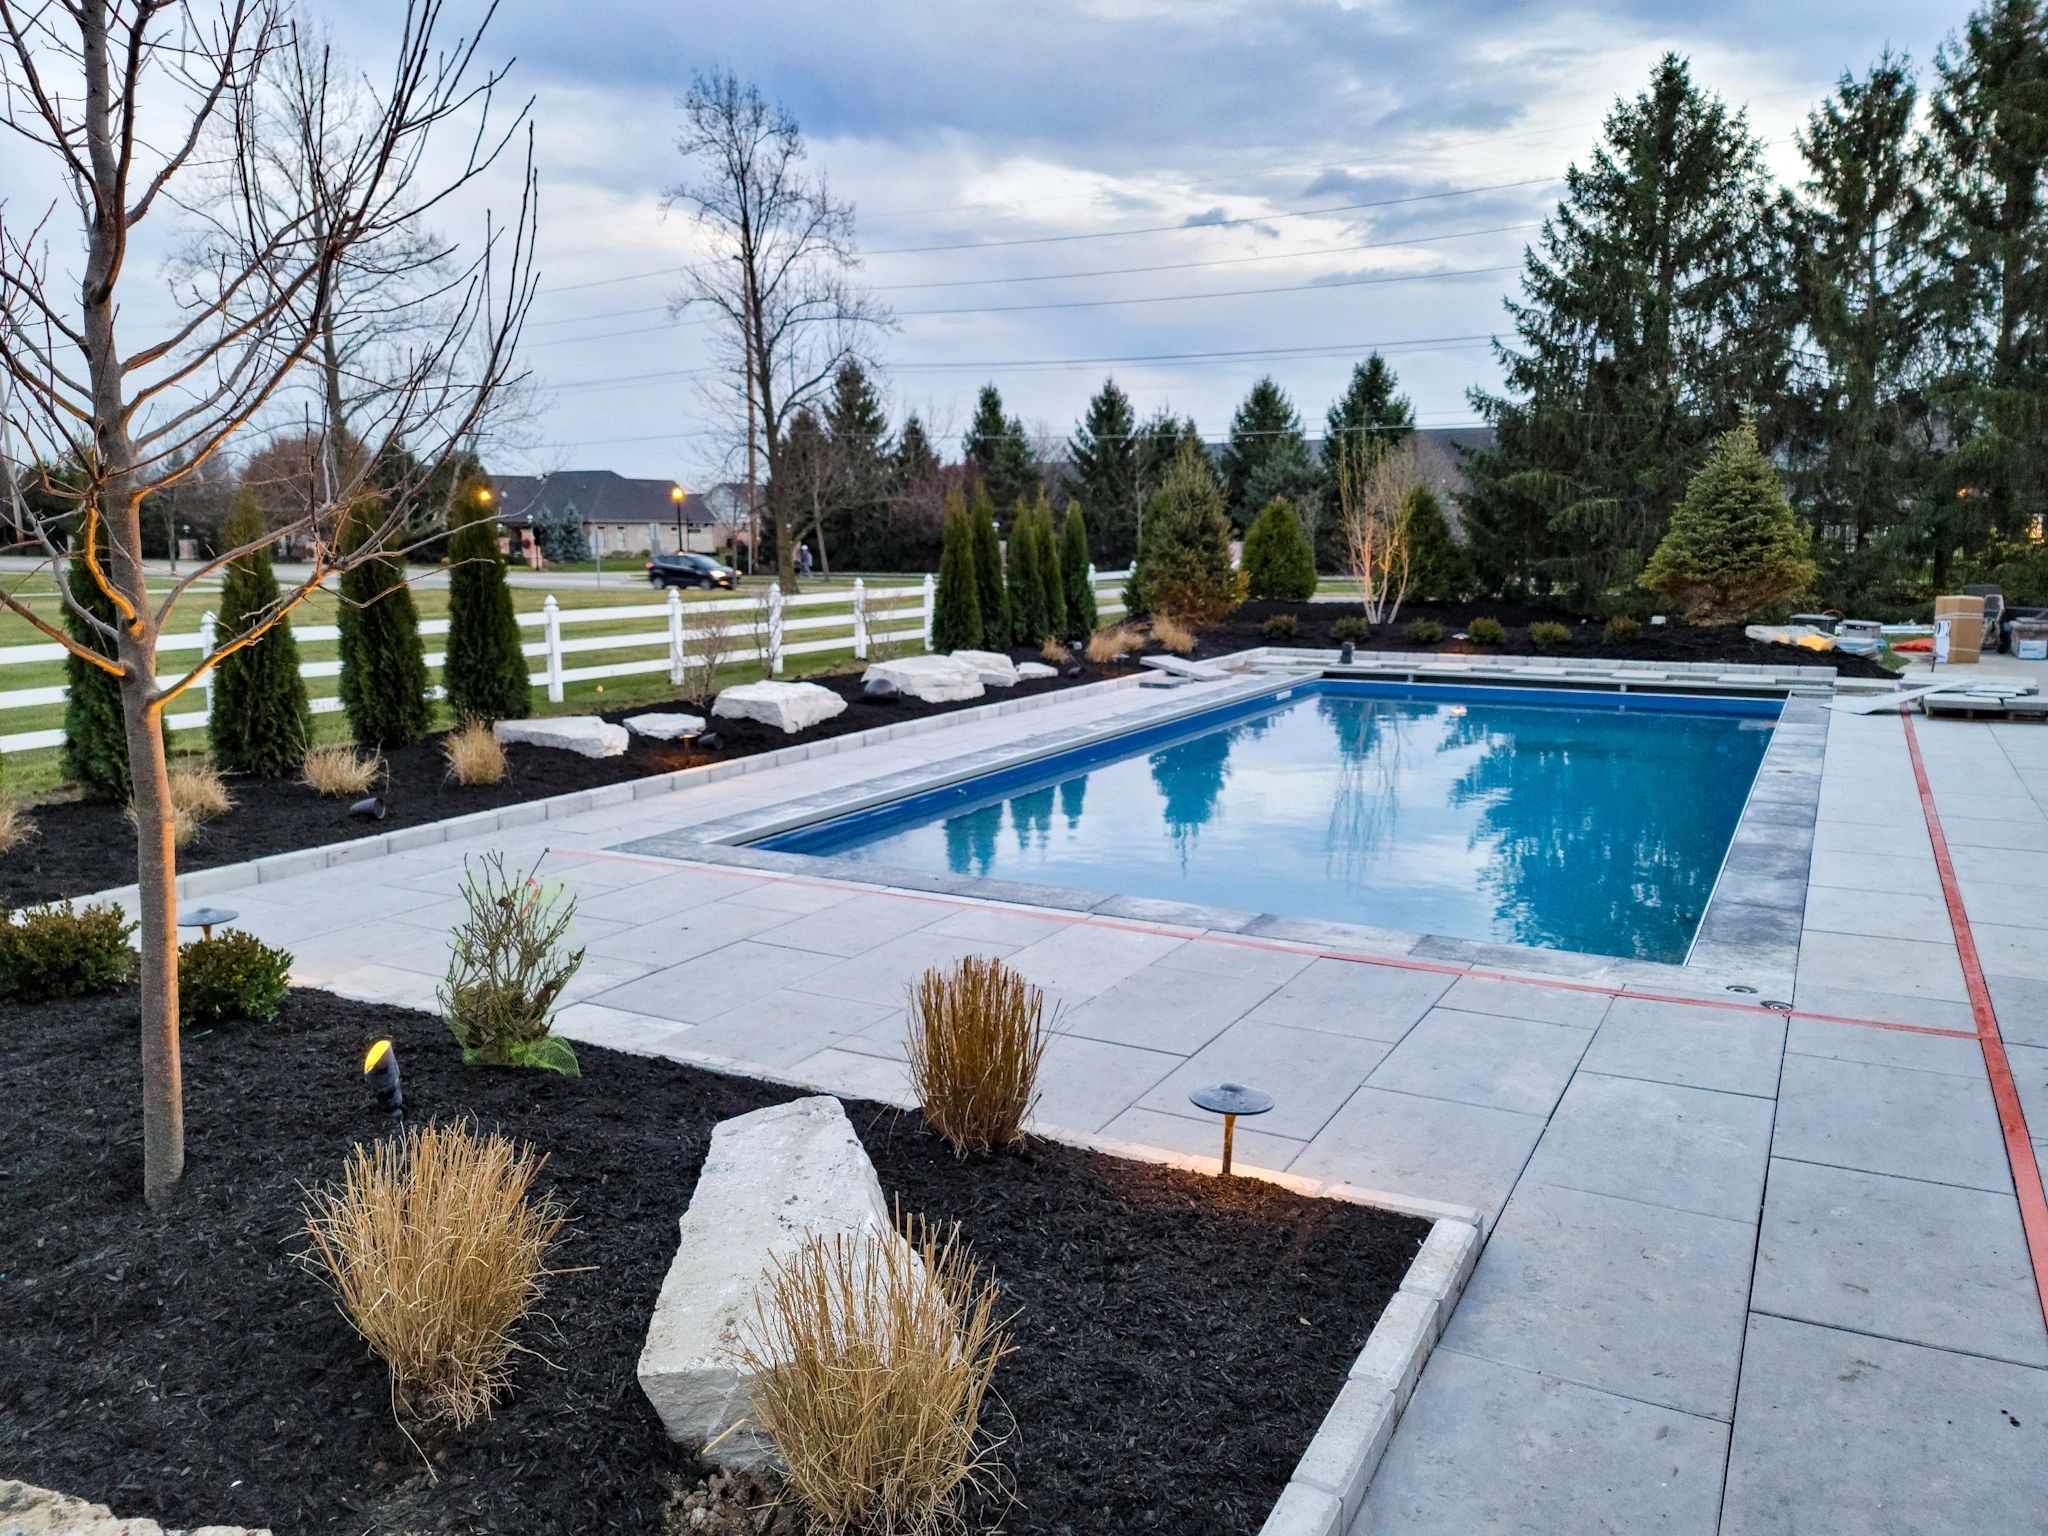 Pool and Paver Patio with Landscaping